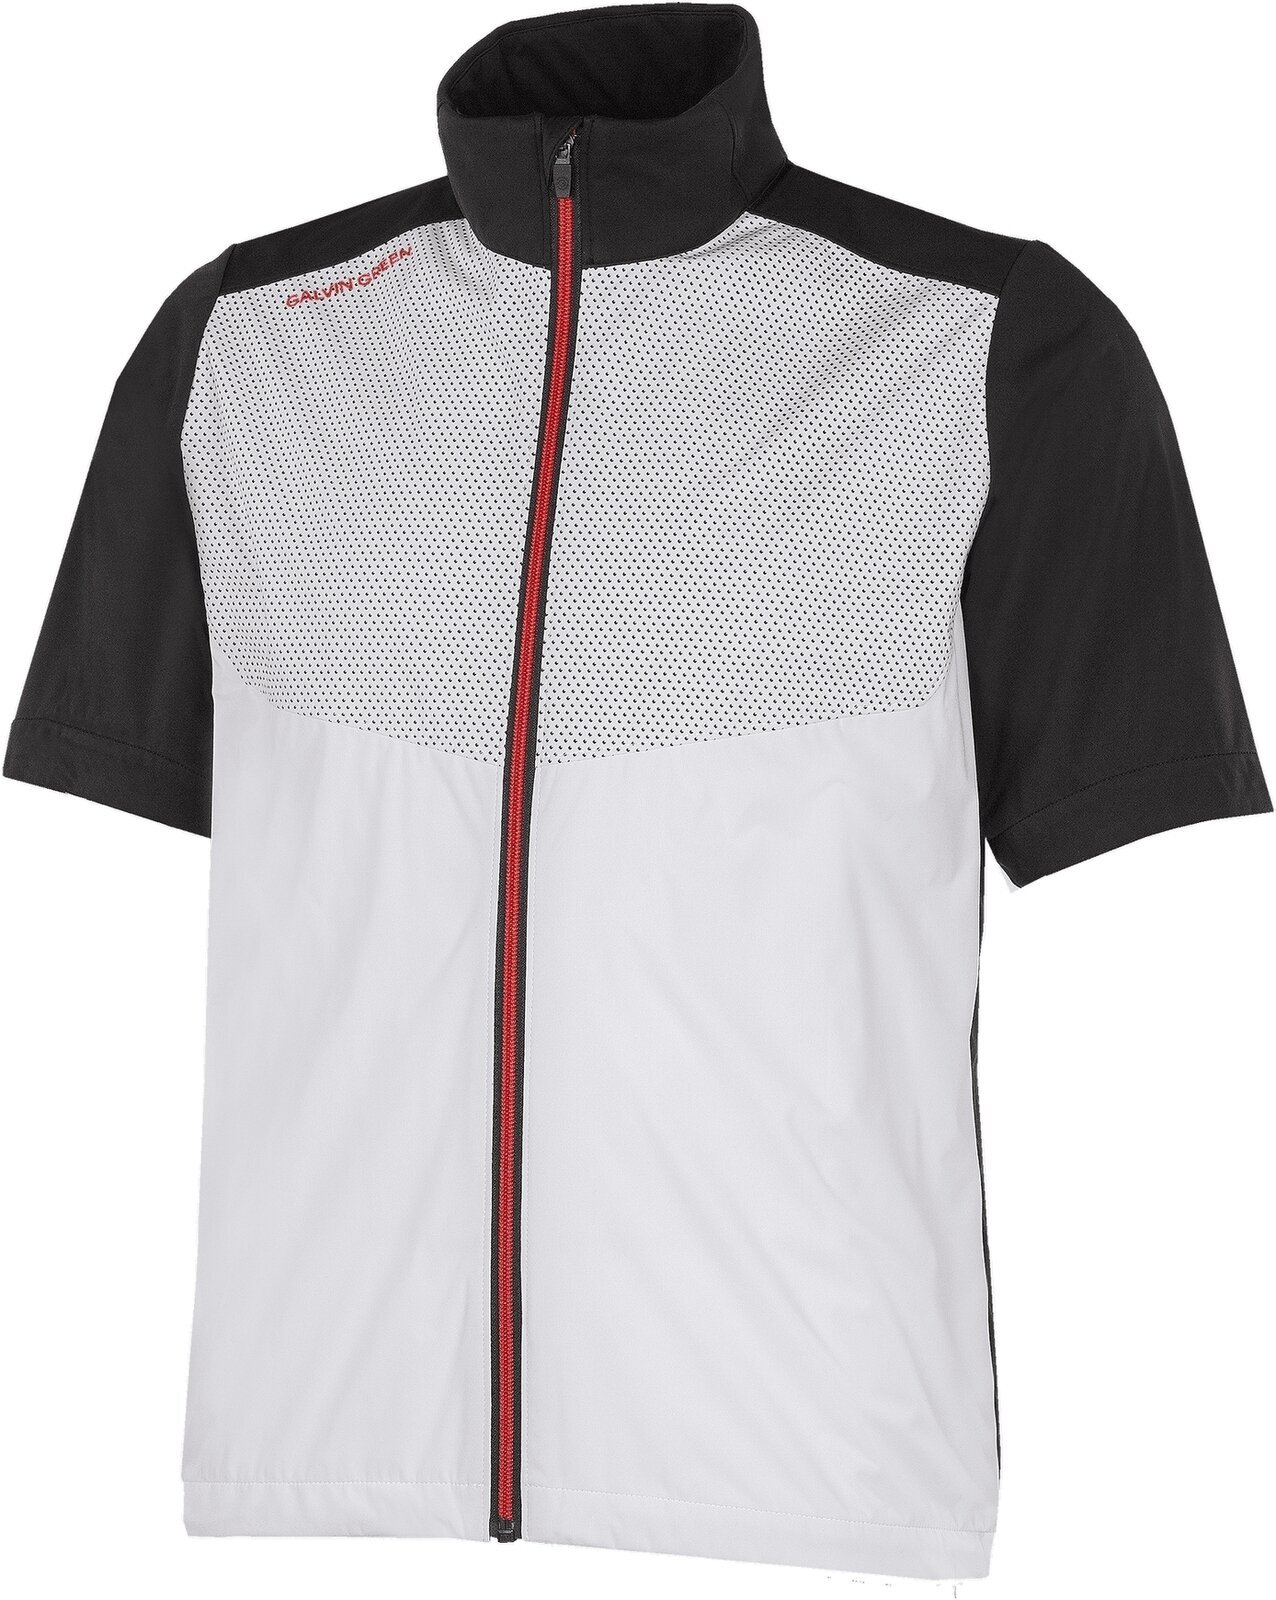 Jacket Galvin Green Livingston Mens Windproof And Water Repellent Short Sleeve Jacket White/Black/Red 2XL